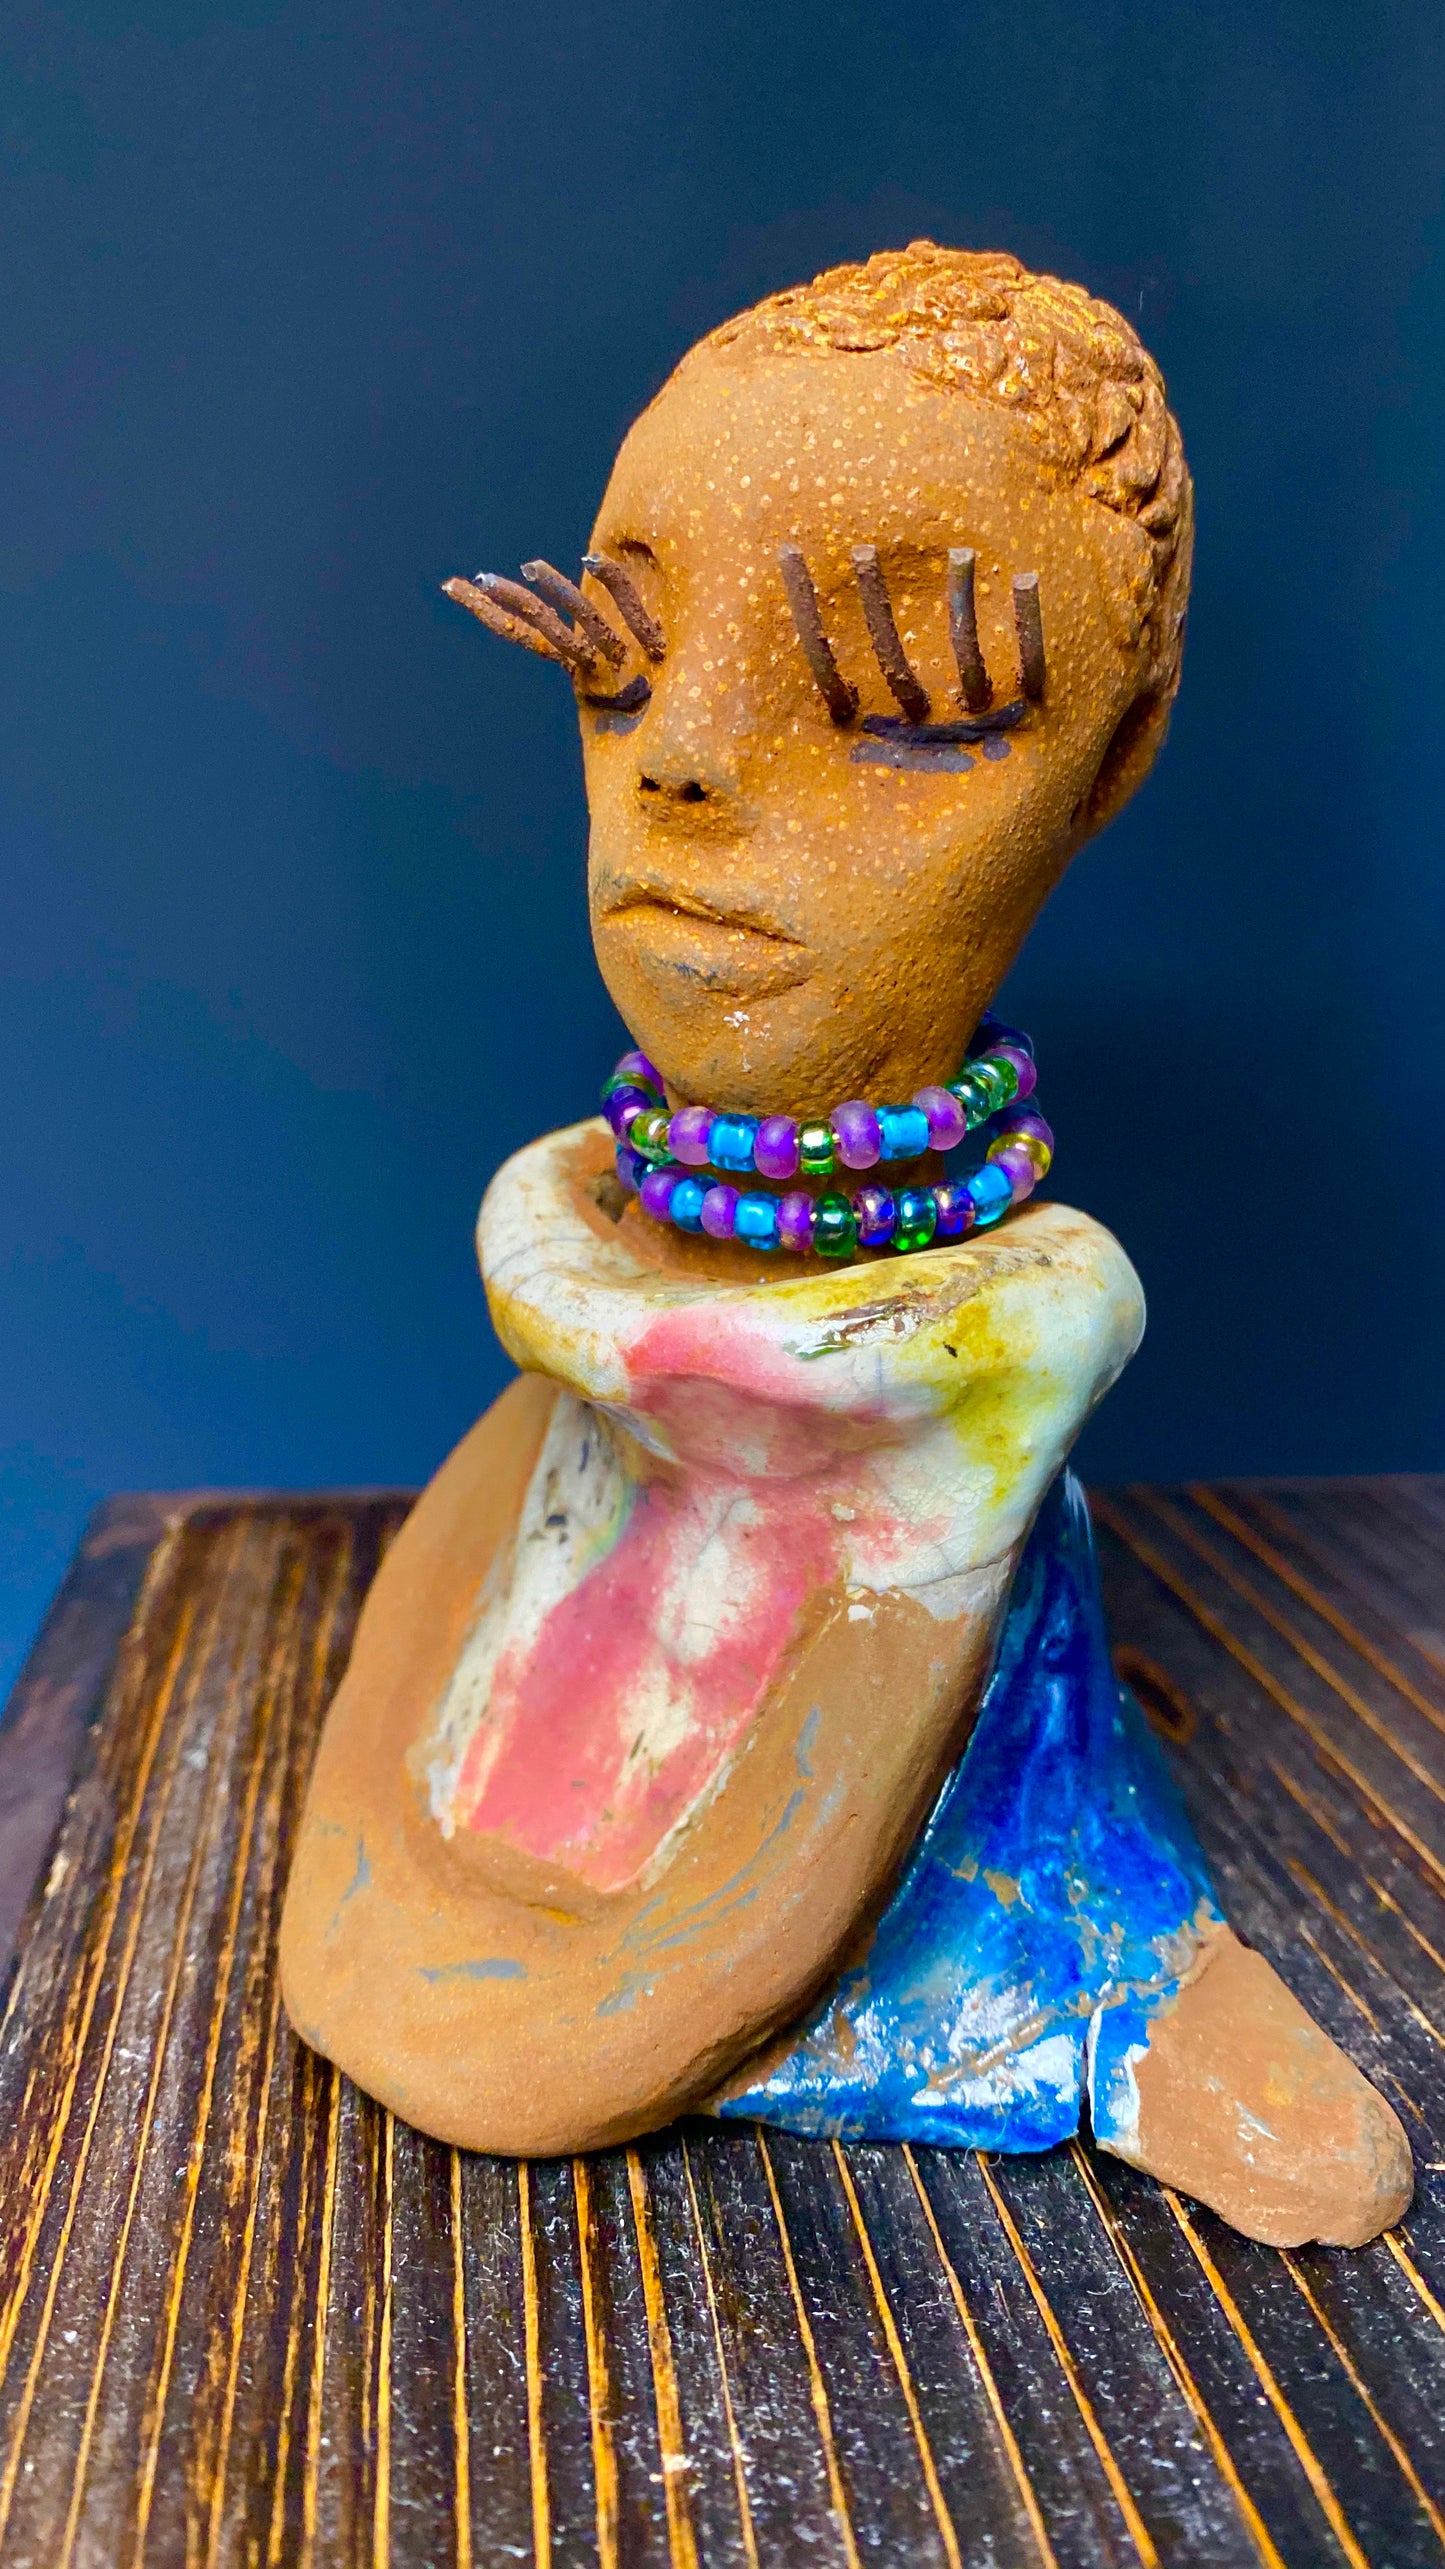 Meet Little Riley! Riley stands 5" x 5”x 3" and weighs  11 ozs.  Riley has a lovely multicolored glossy dress with a matching beaded necklace.  She has long lashes!  Riley appears to sit in a yoga pose. Her long arms rest at her side. Riley is a great starter piece from the Herdew Collection!